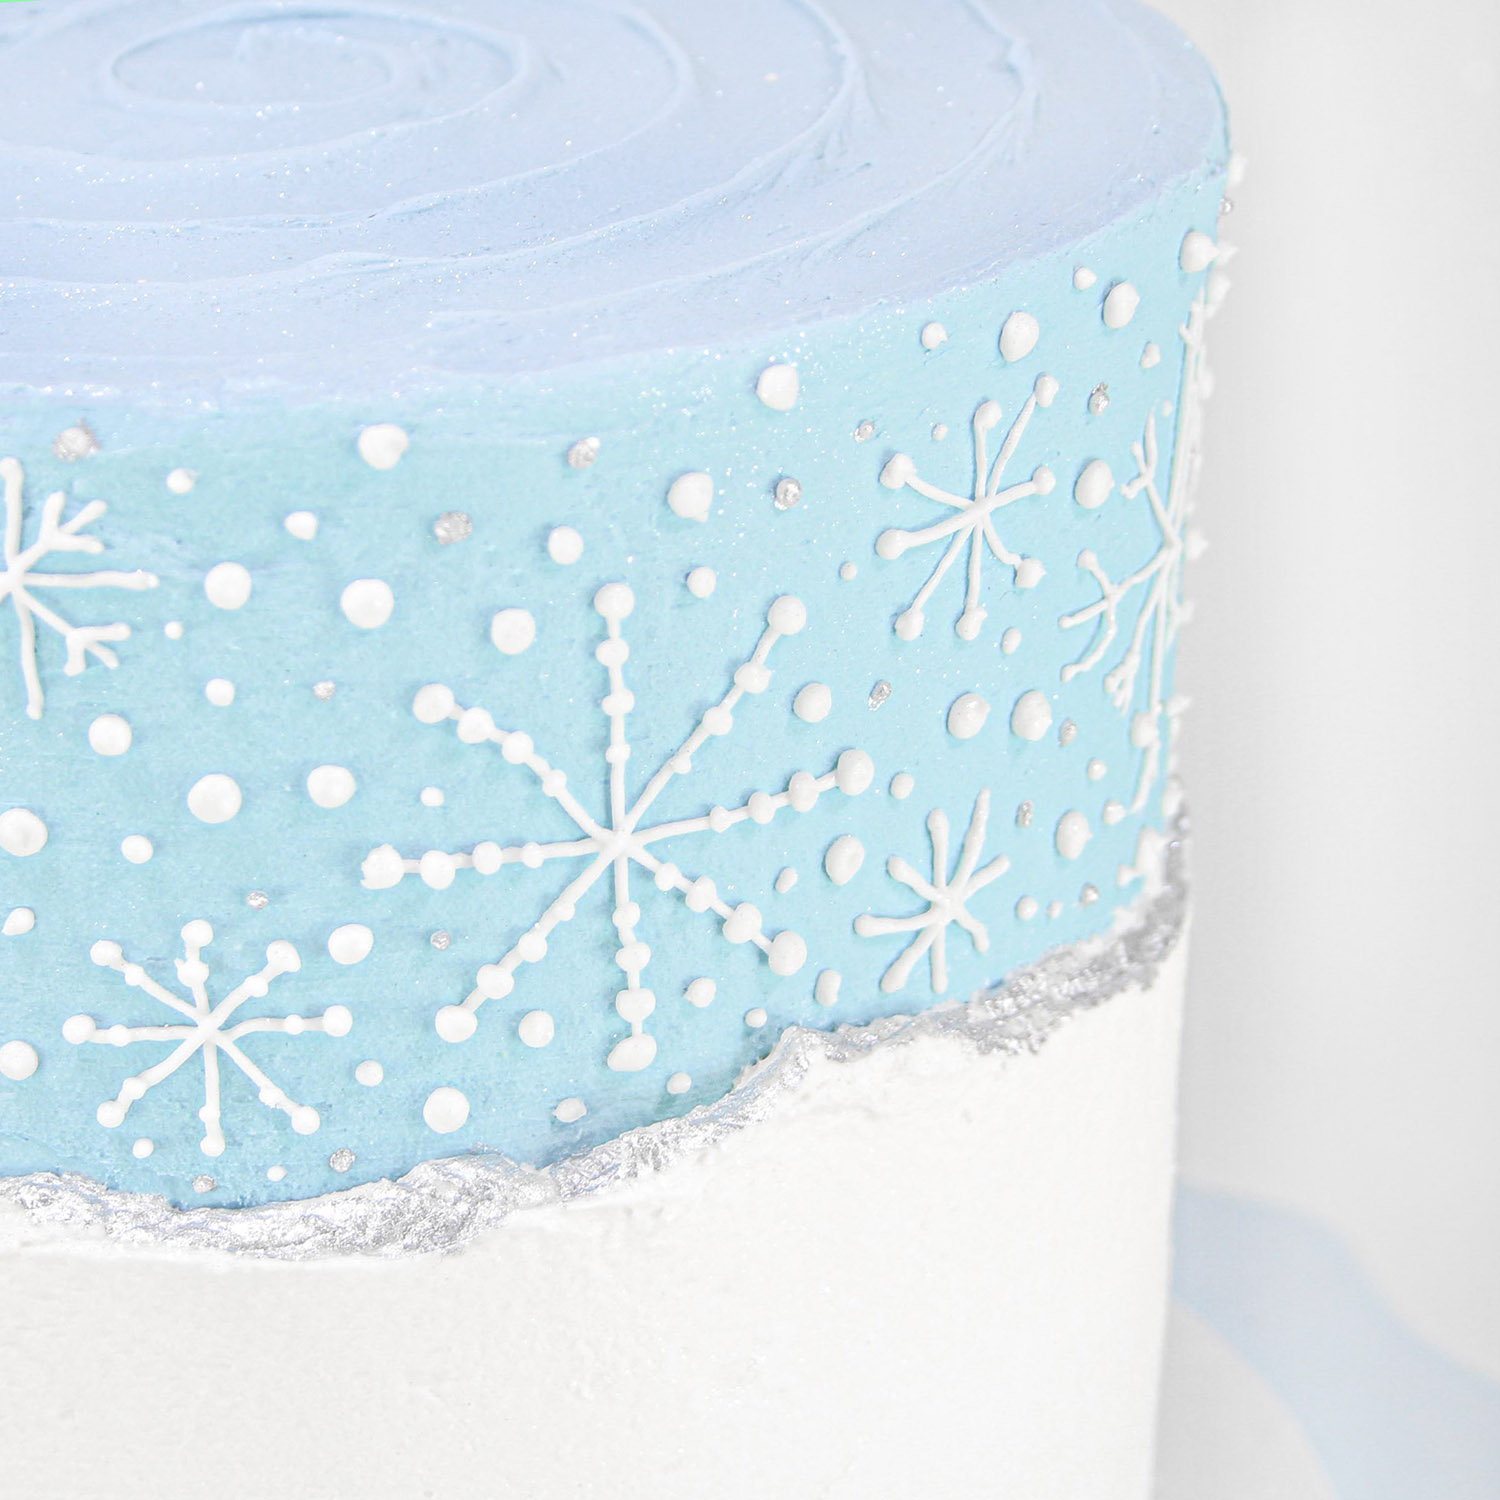 Hand piped snowflakes on blue buttercream just above a live edge snow faultline border painted in silver luster dust.